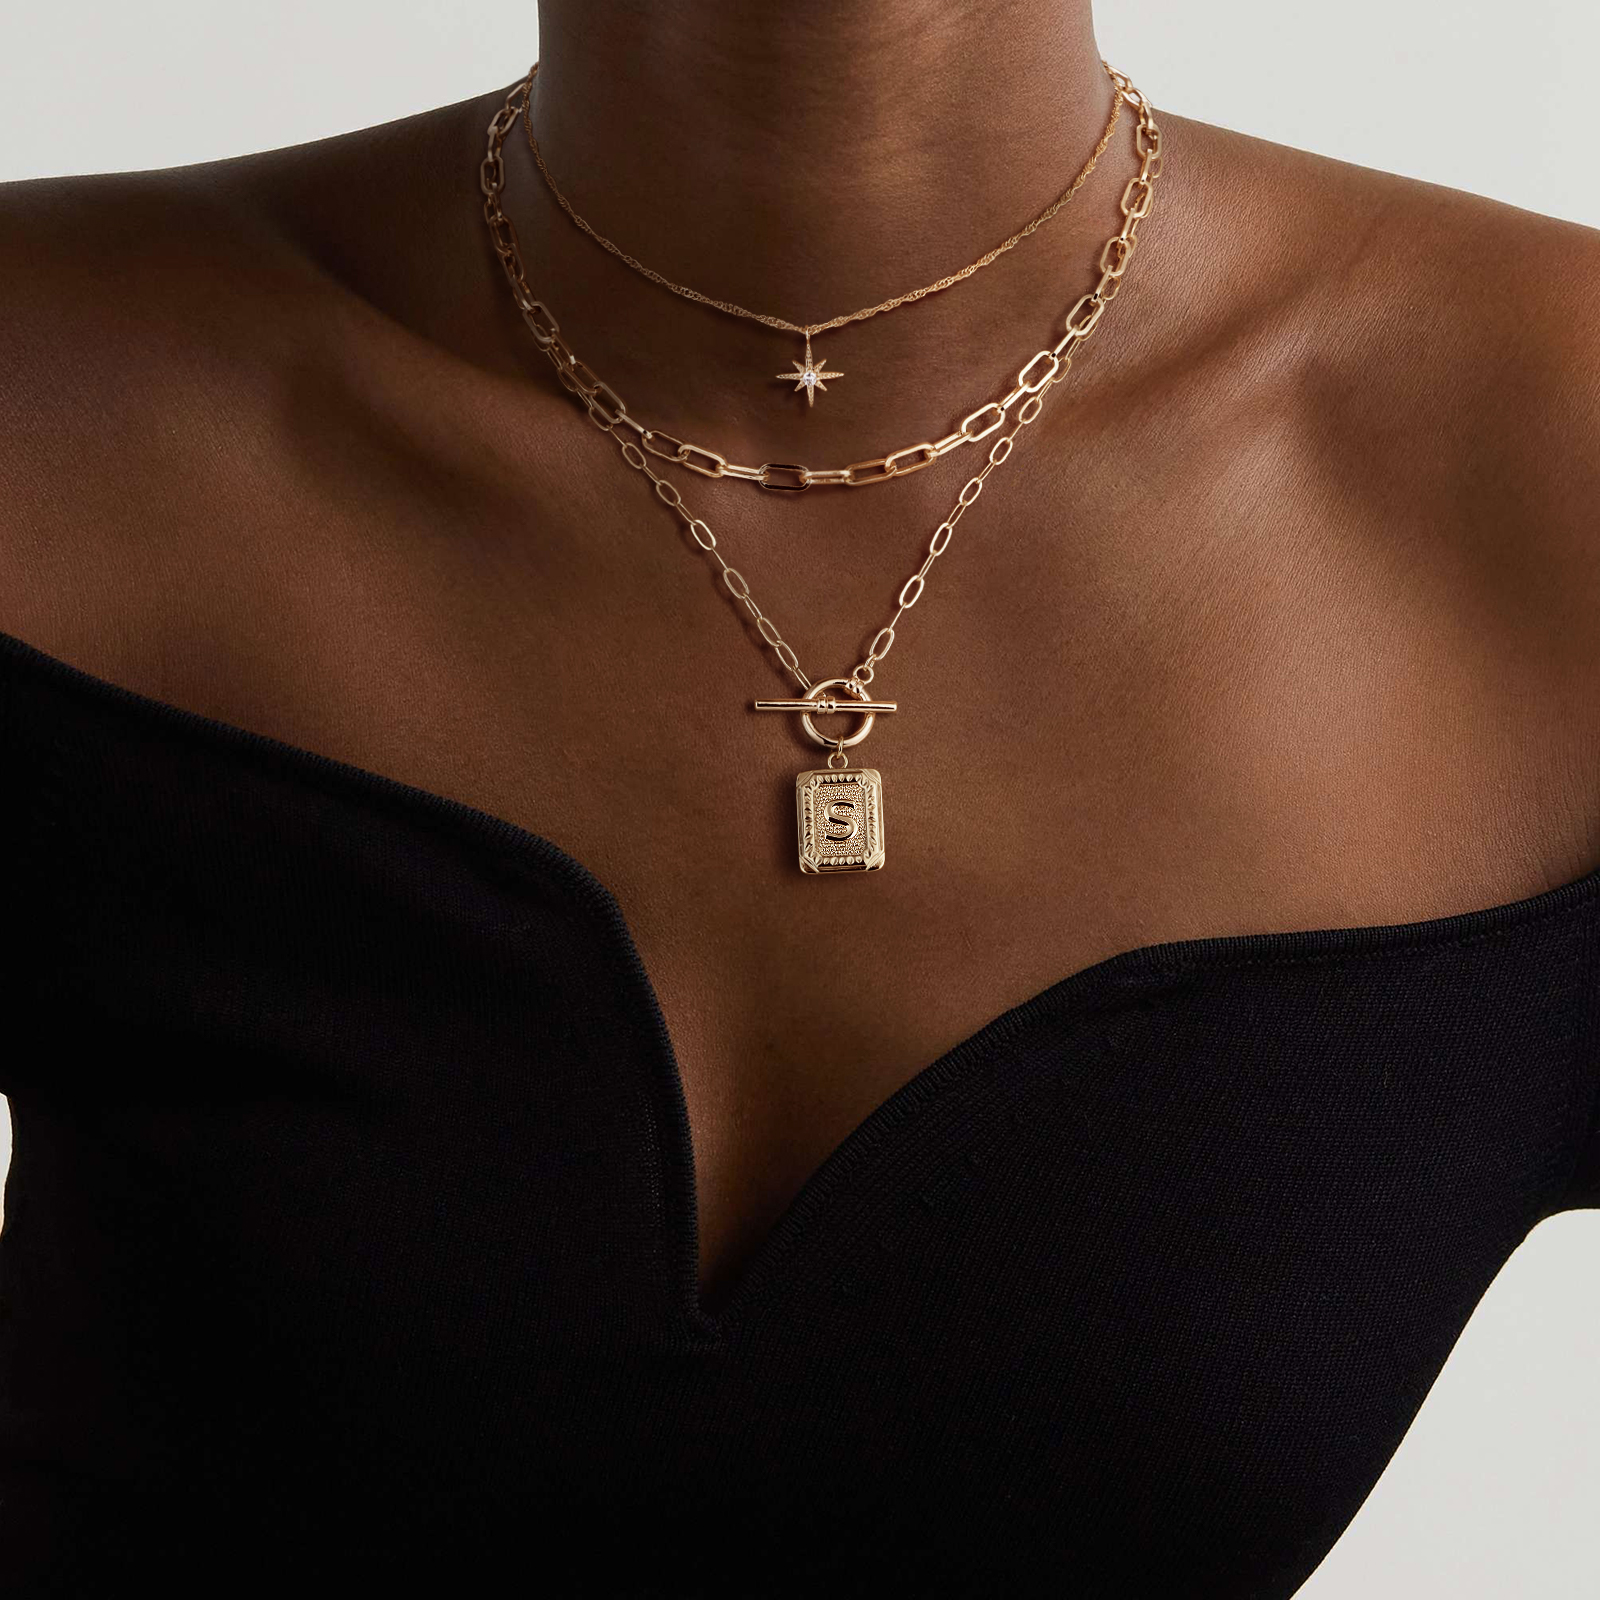 Layered Gold Initial Necklaces for Women Square Letter Pendant 14K Gold Plated Dainty Paperclip Chain Toggle Clasp A-Z Letter North Star Layering Choker Necklaces Jewelry Gifts for Girls - image 4 of 7